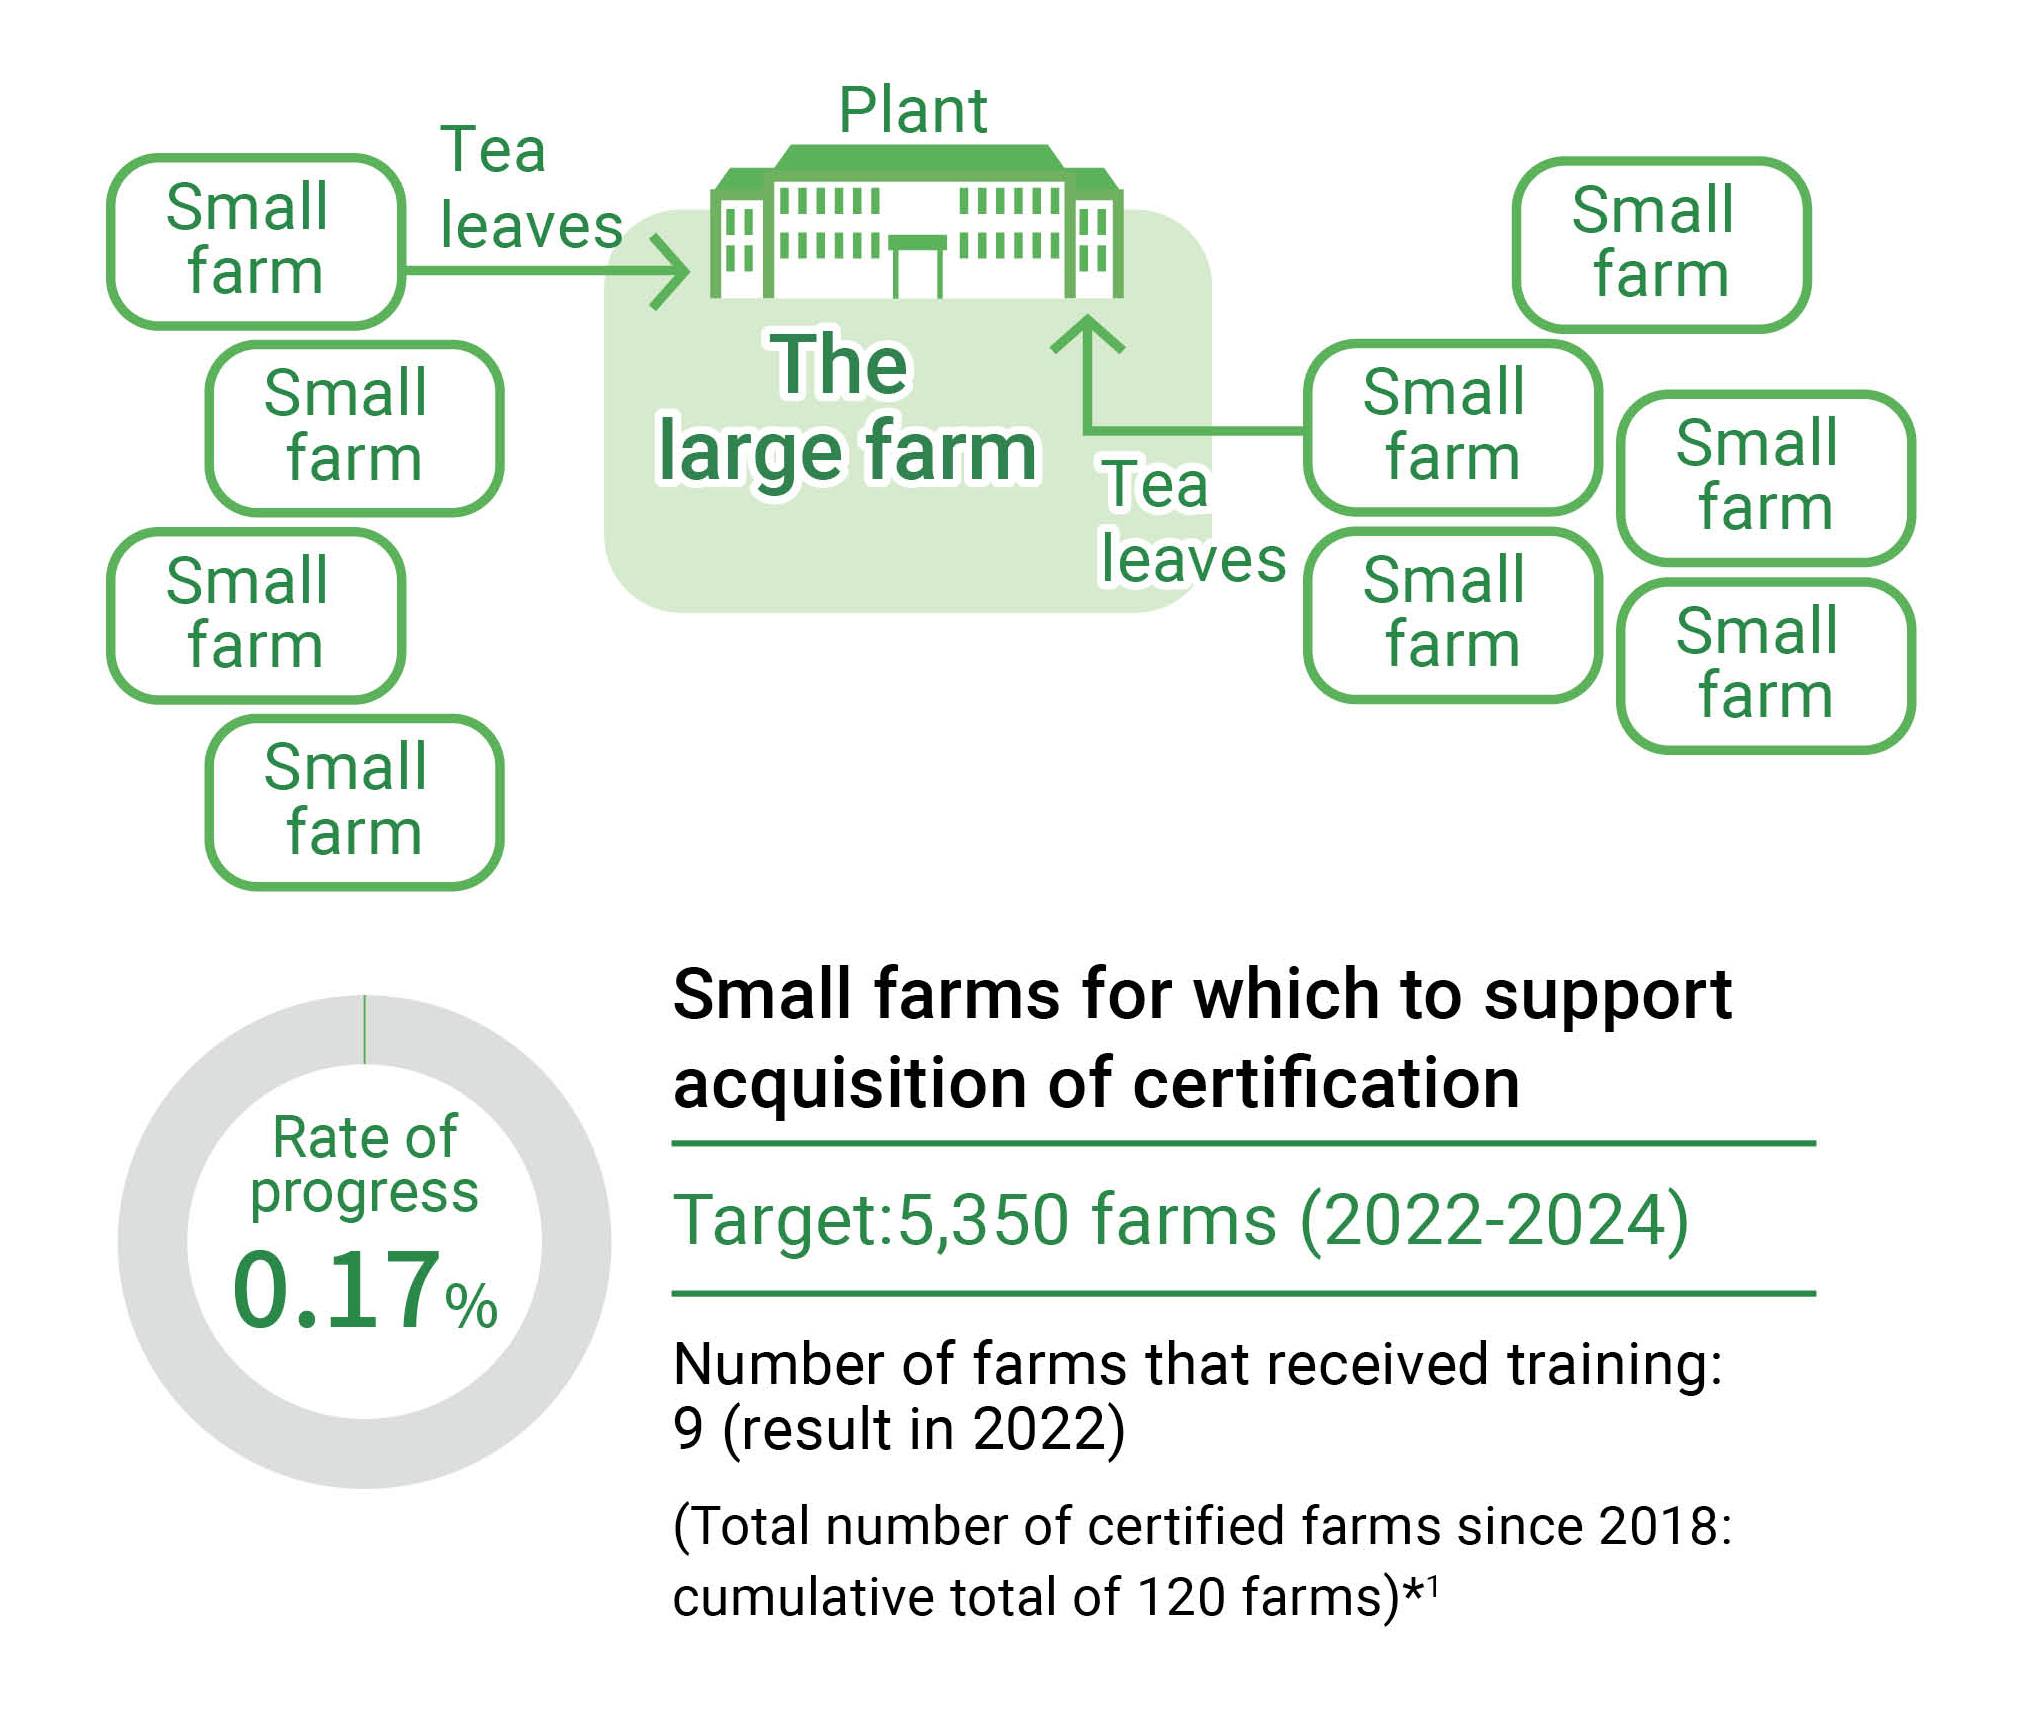 Small farms for which to support acquisition of certification